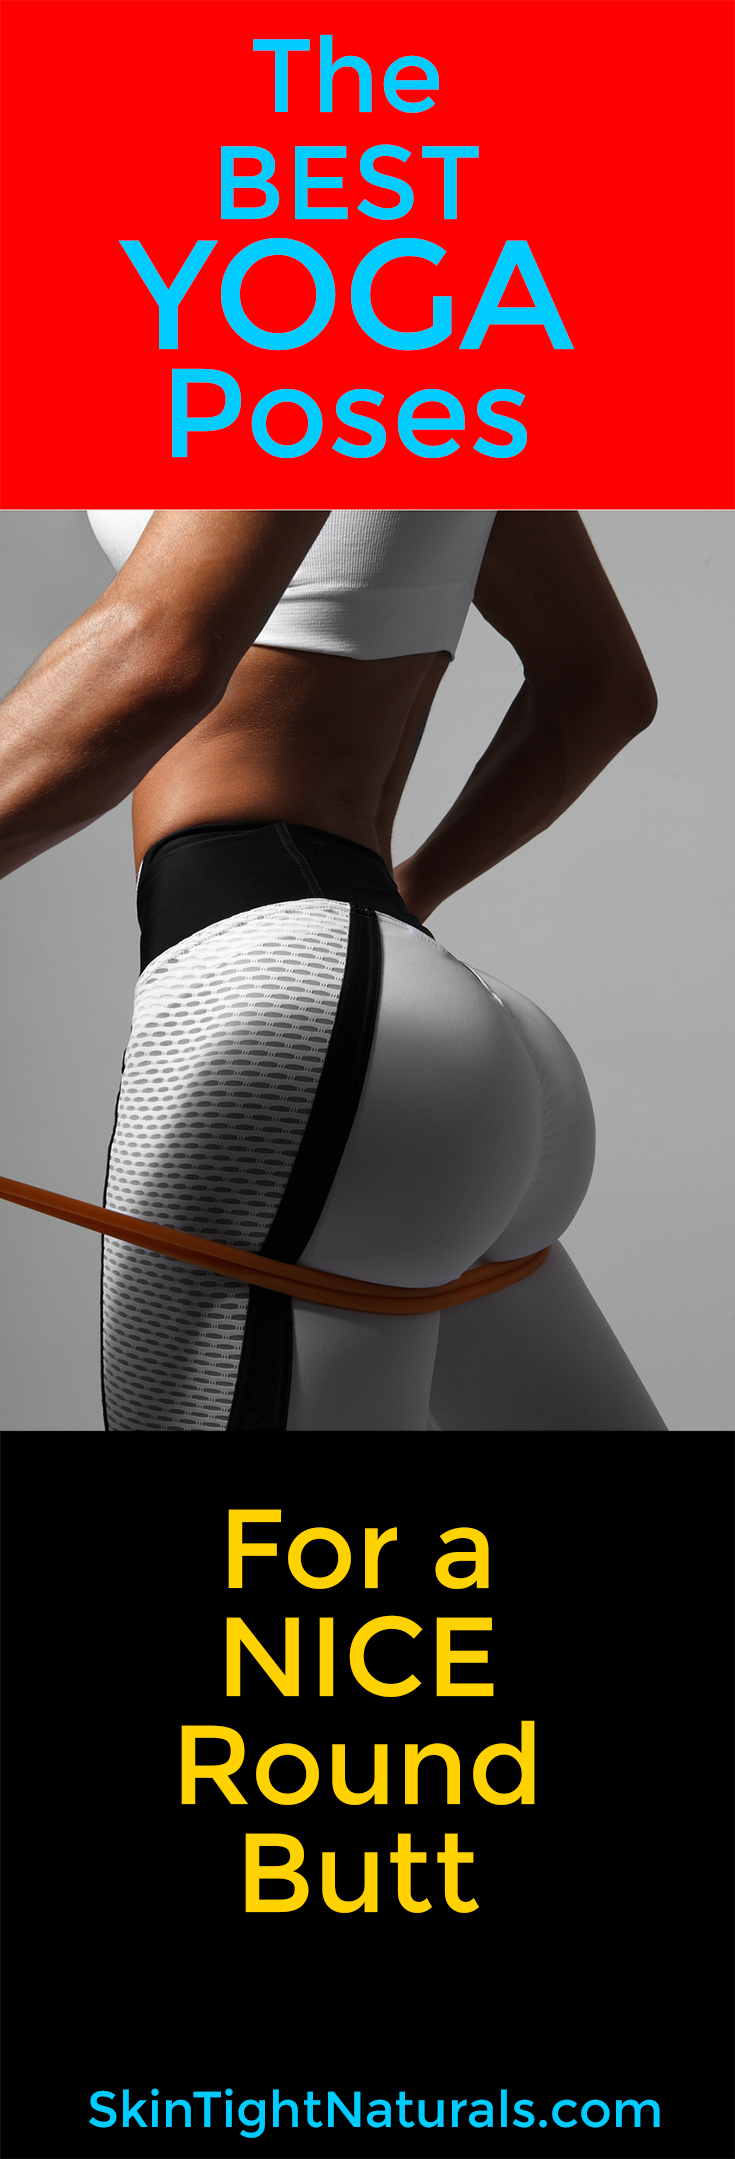 The 7 Best Workout Classes for Your Butt | Women's Health